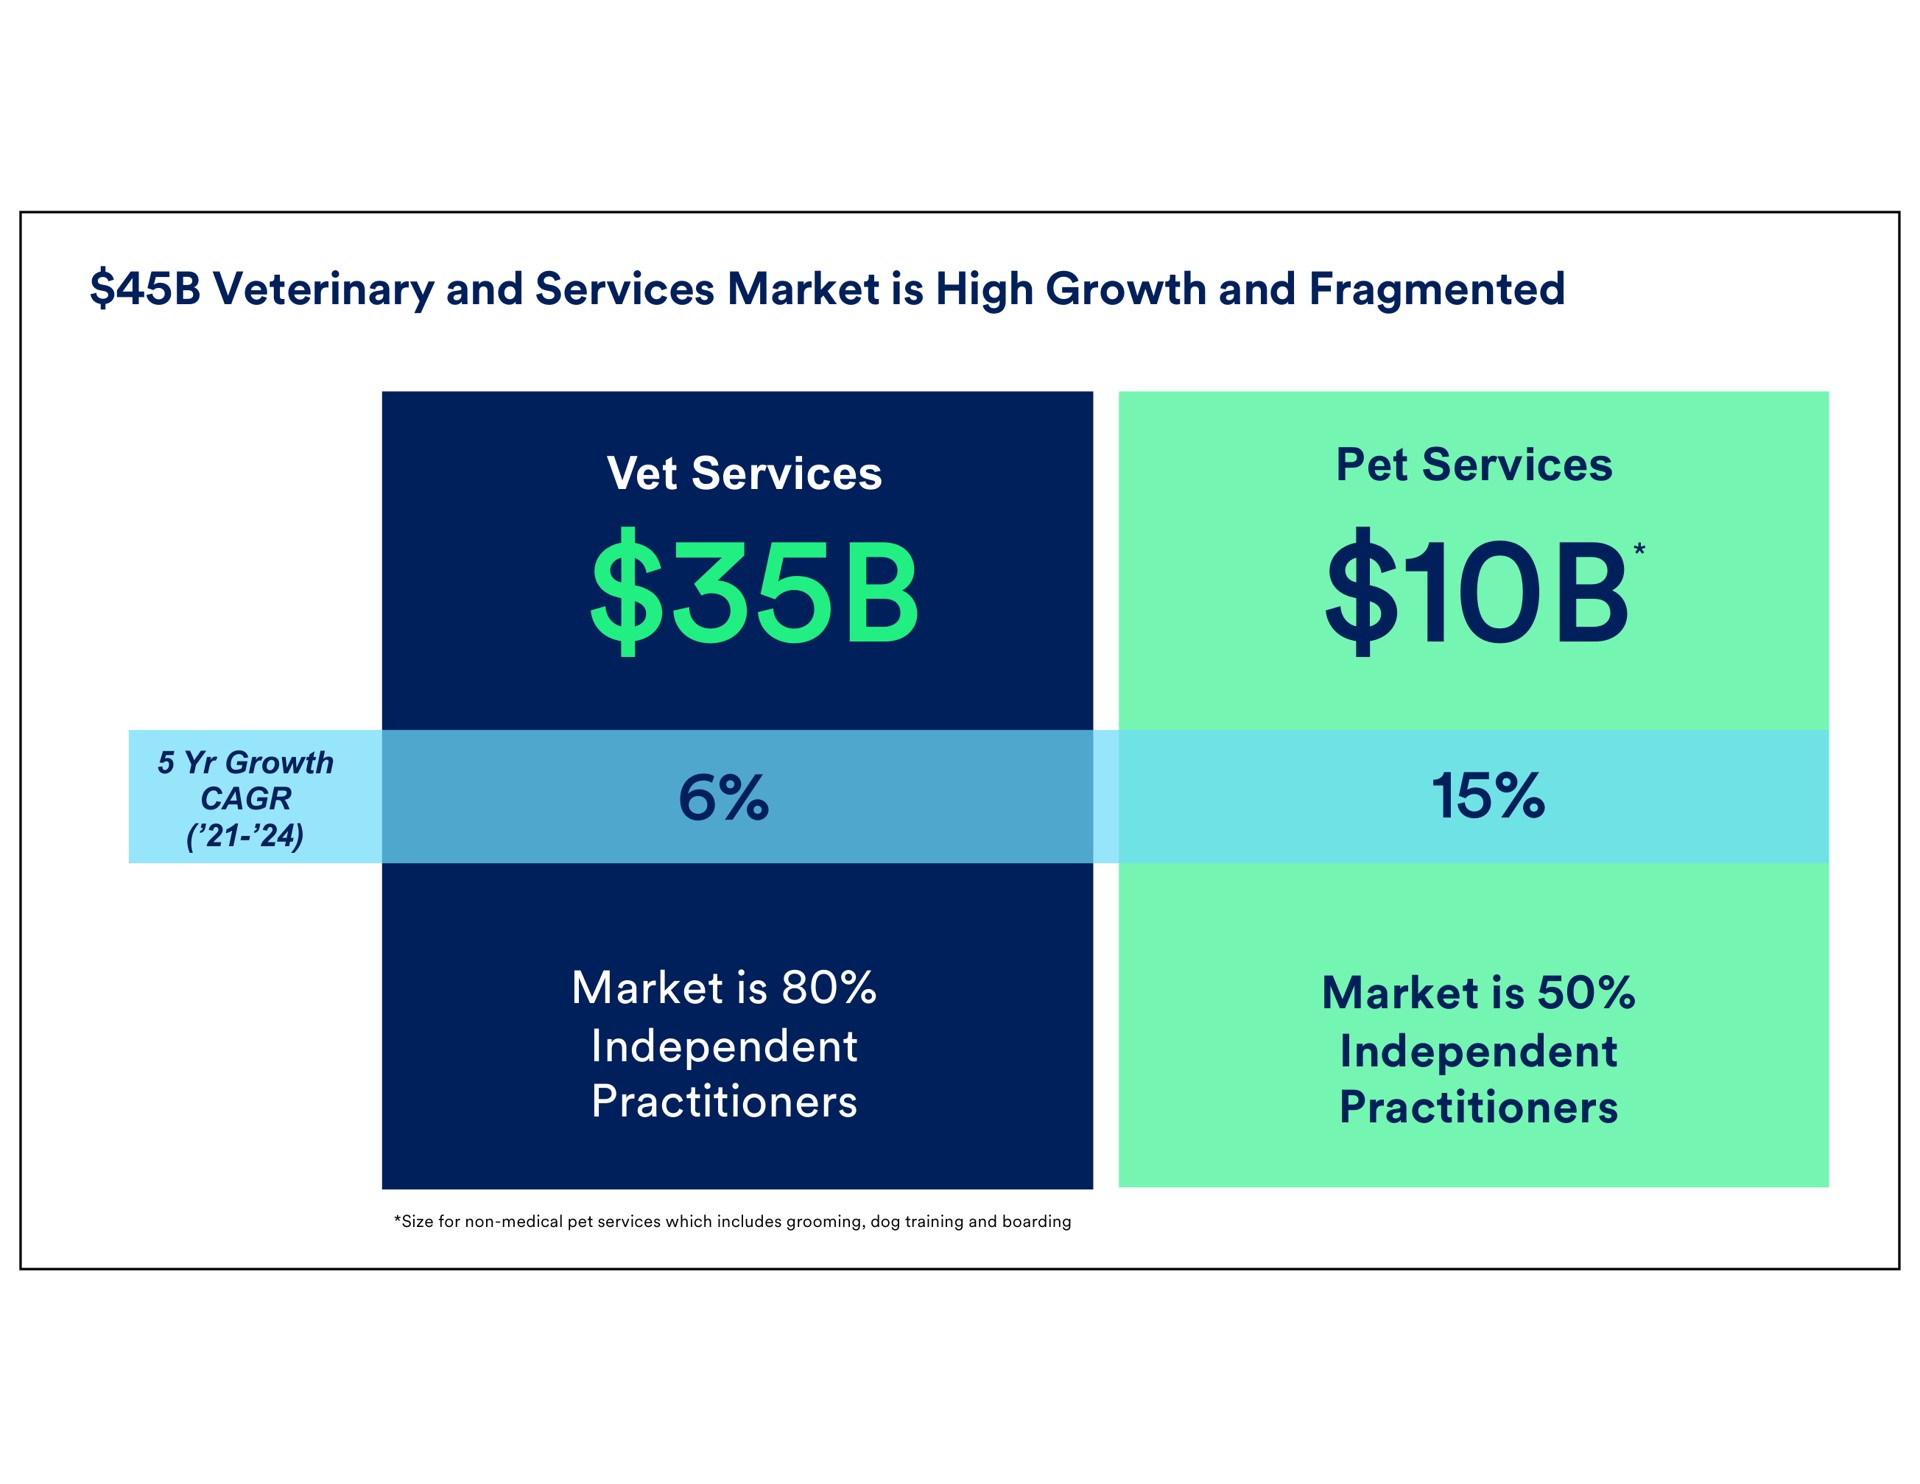 veterinary and services market is high growth and fragmented vet services market is independent practitioners pet services market is independent practitioners non medical which includes grooming dog training boarding | Petco